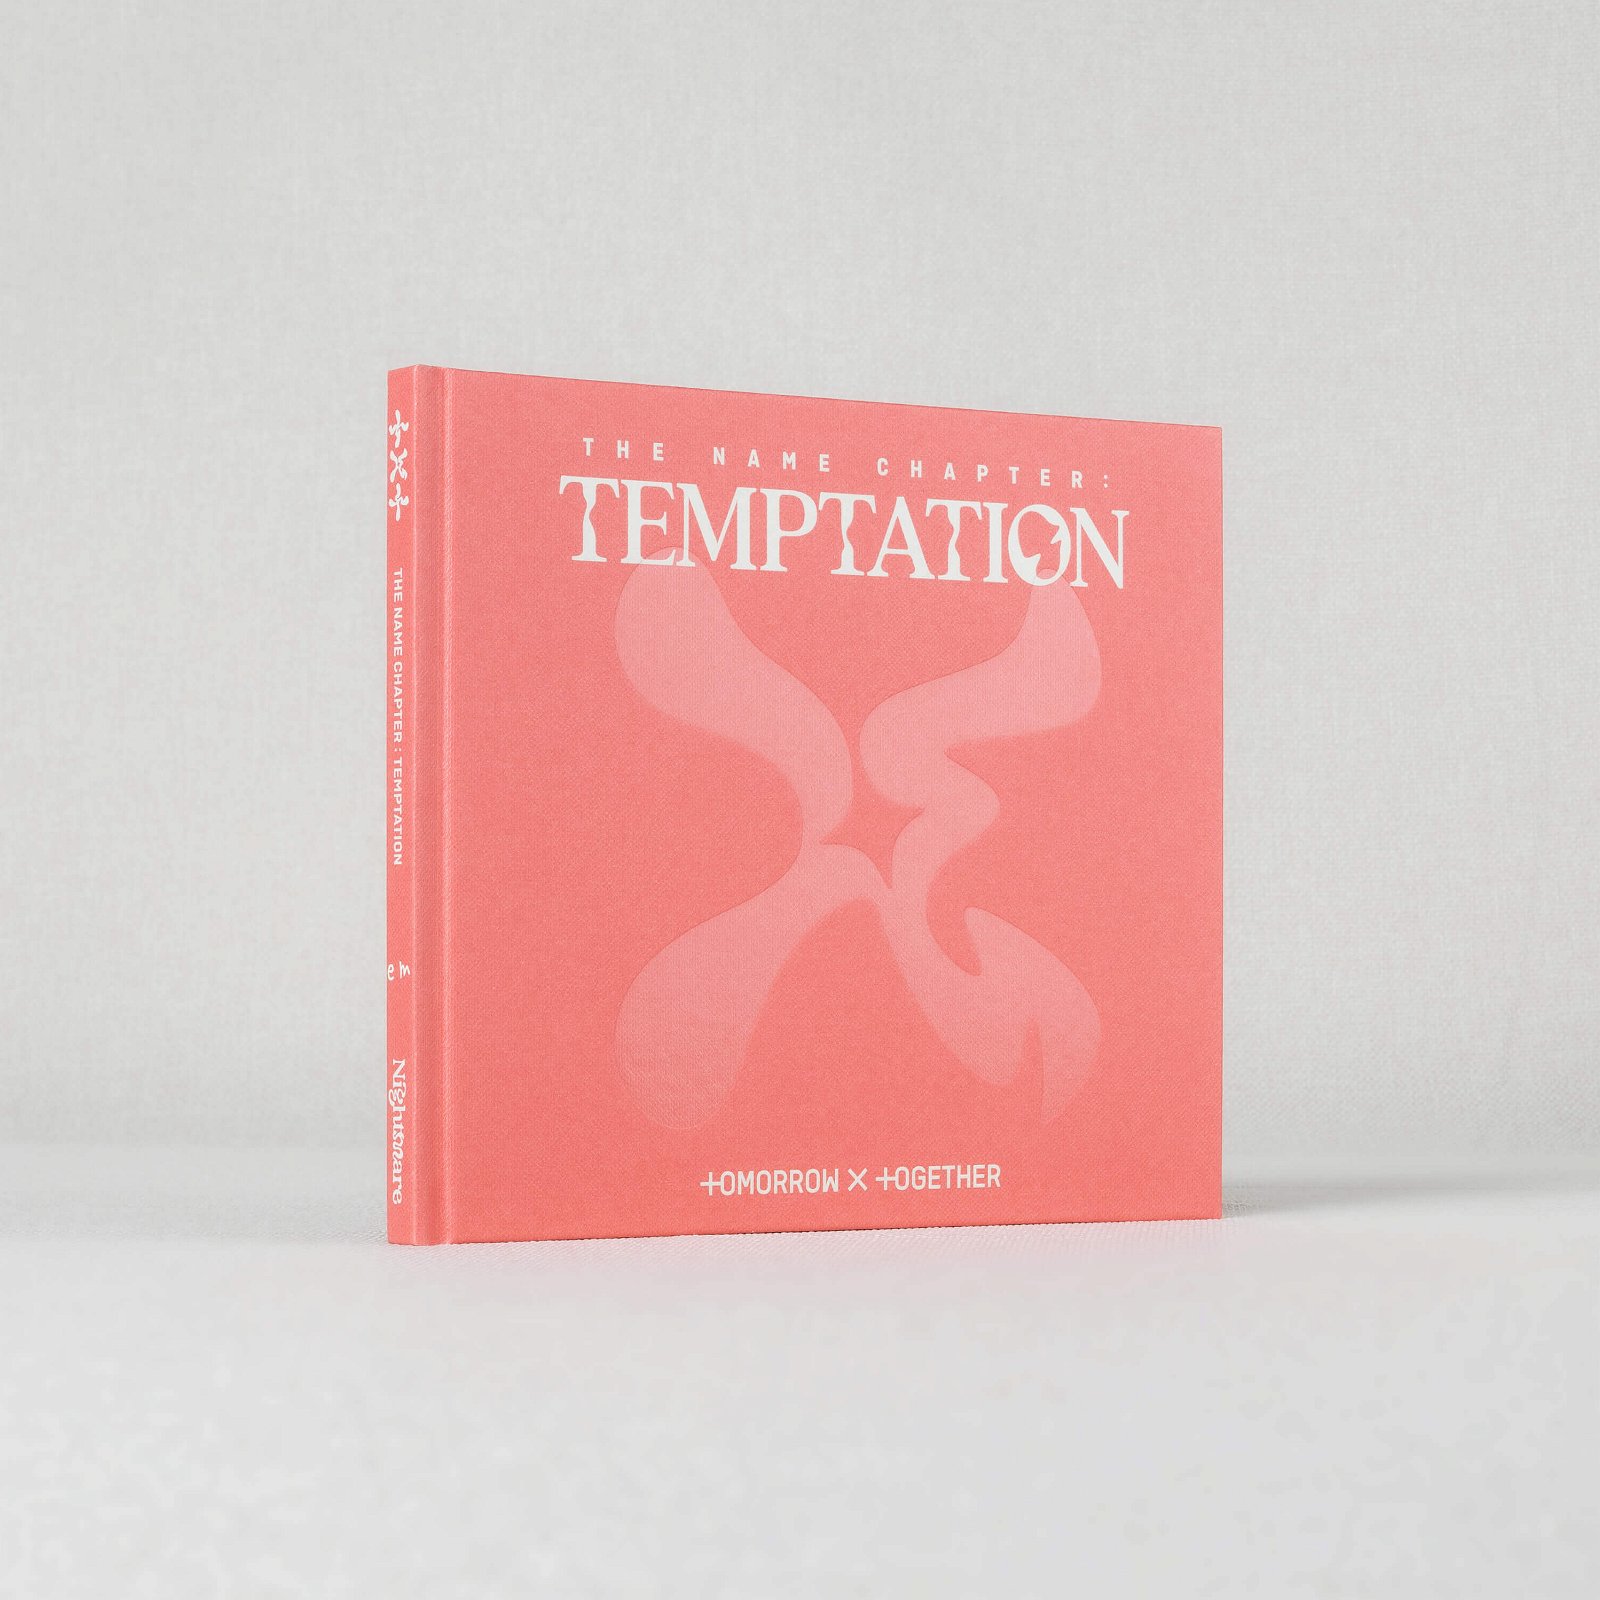 CD Shop - TOMORROW X TOGETHER THE NAME CHAPTER:TEMPTATIO